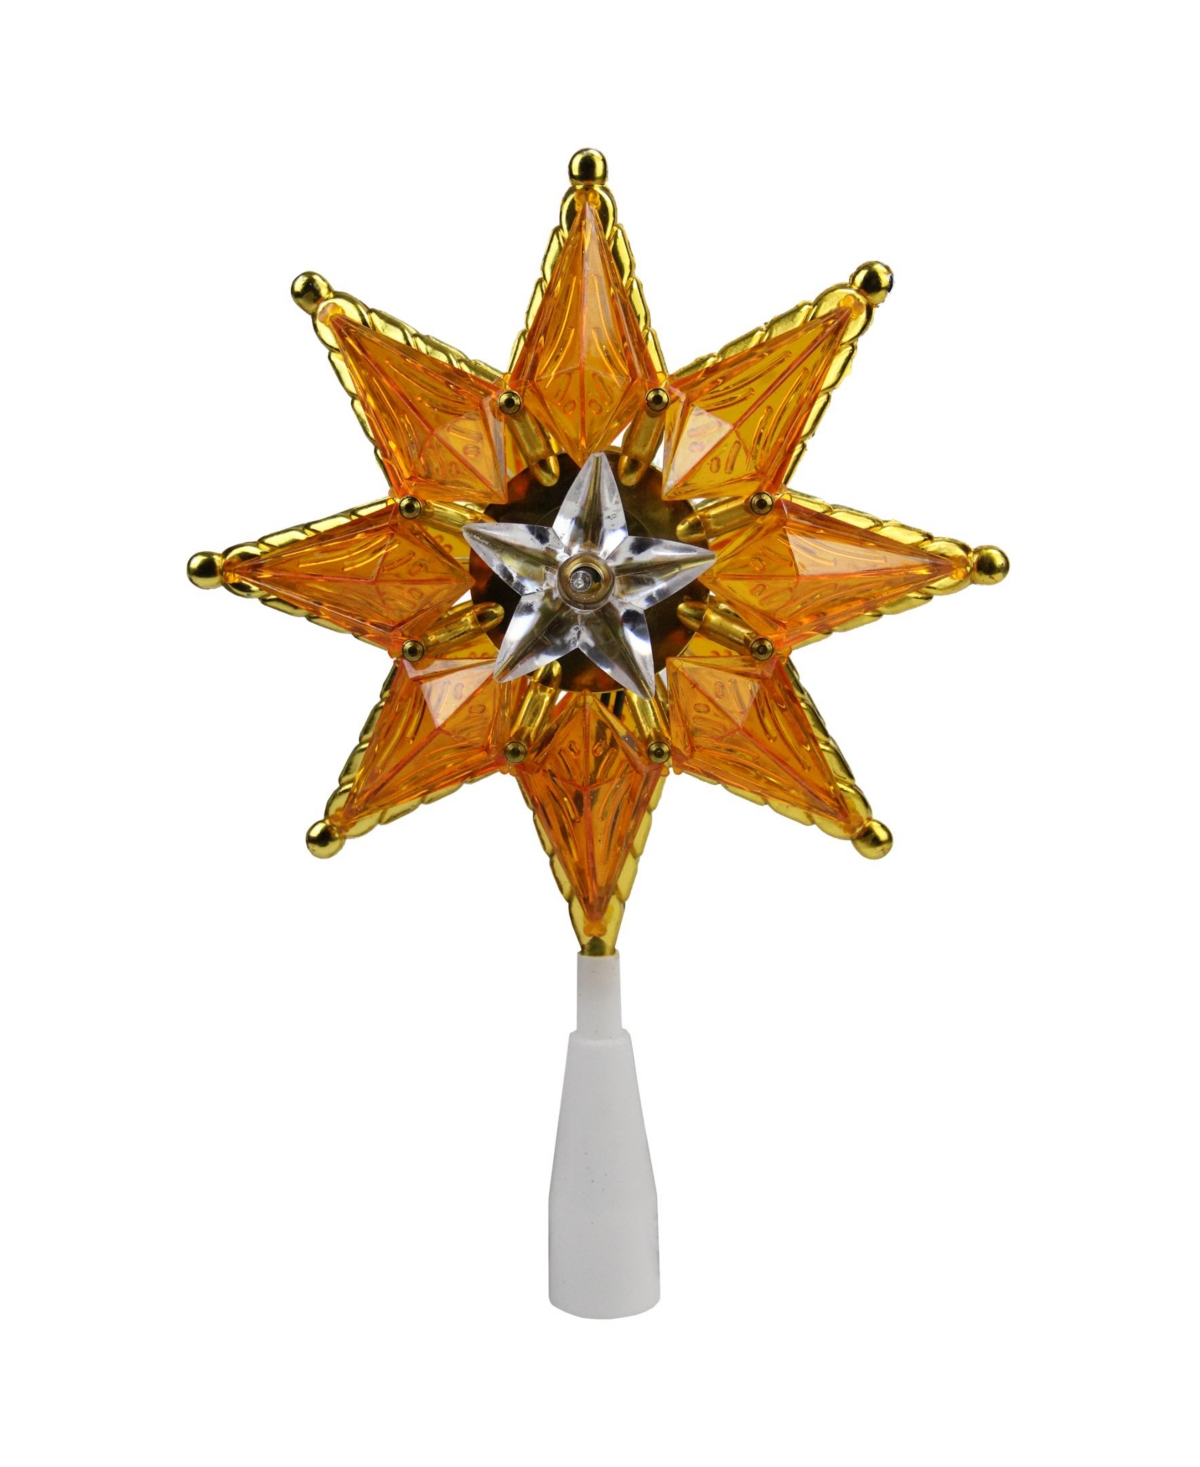 8" Gold Mosaic 8-Point Star Christmas Tree Topper - Clear Lights - Orange